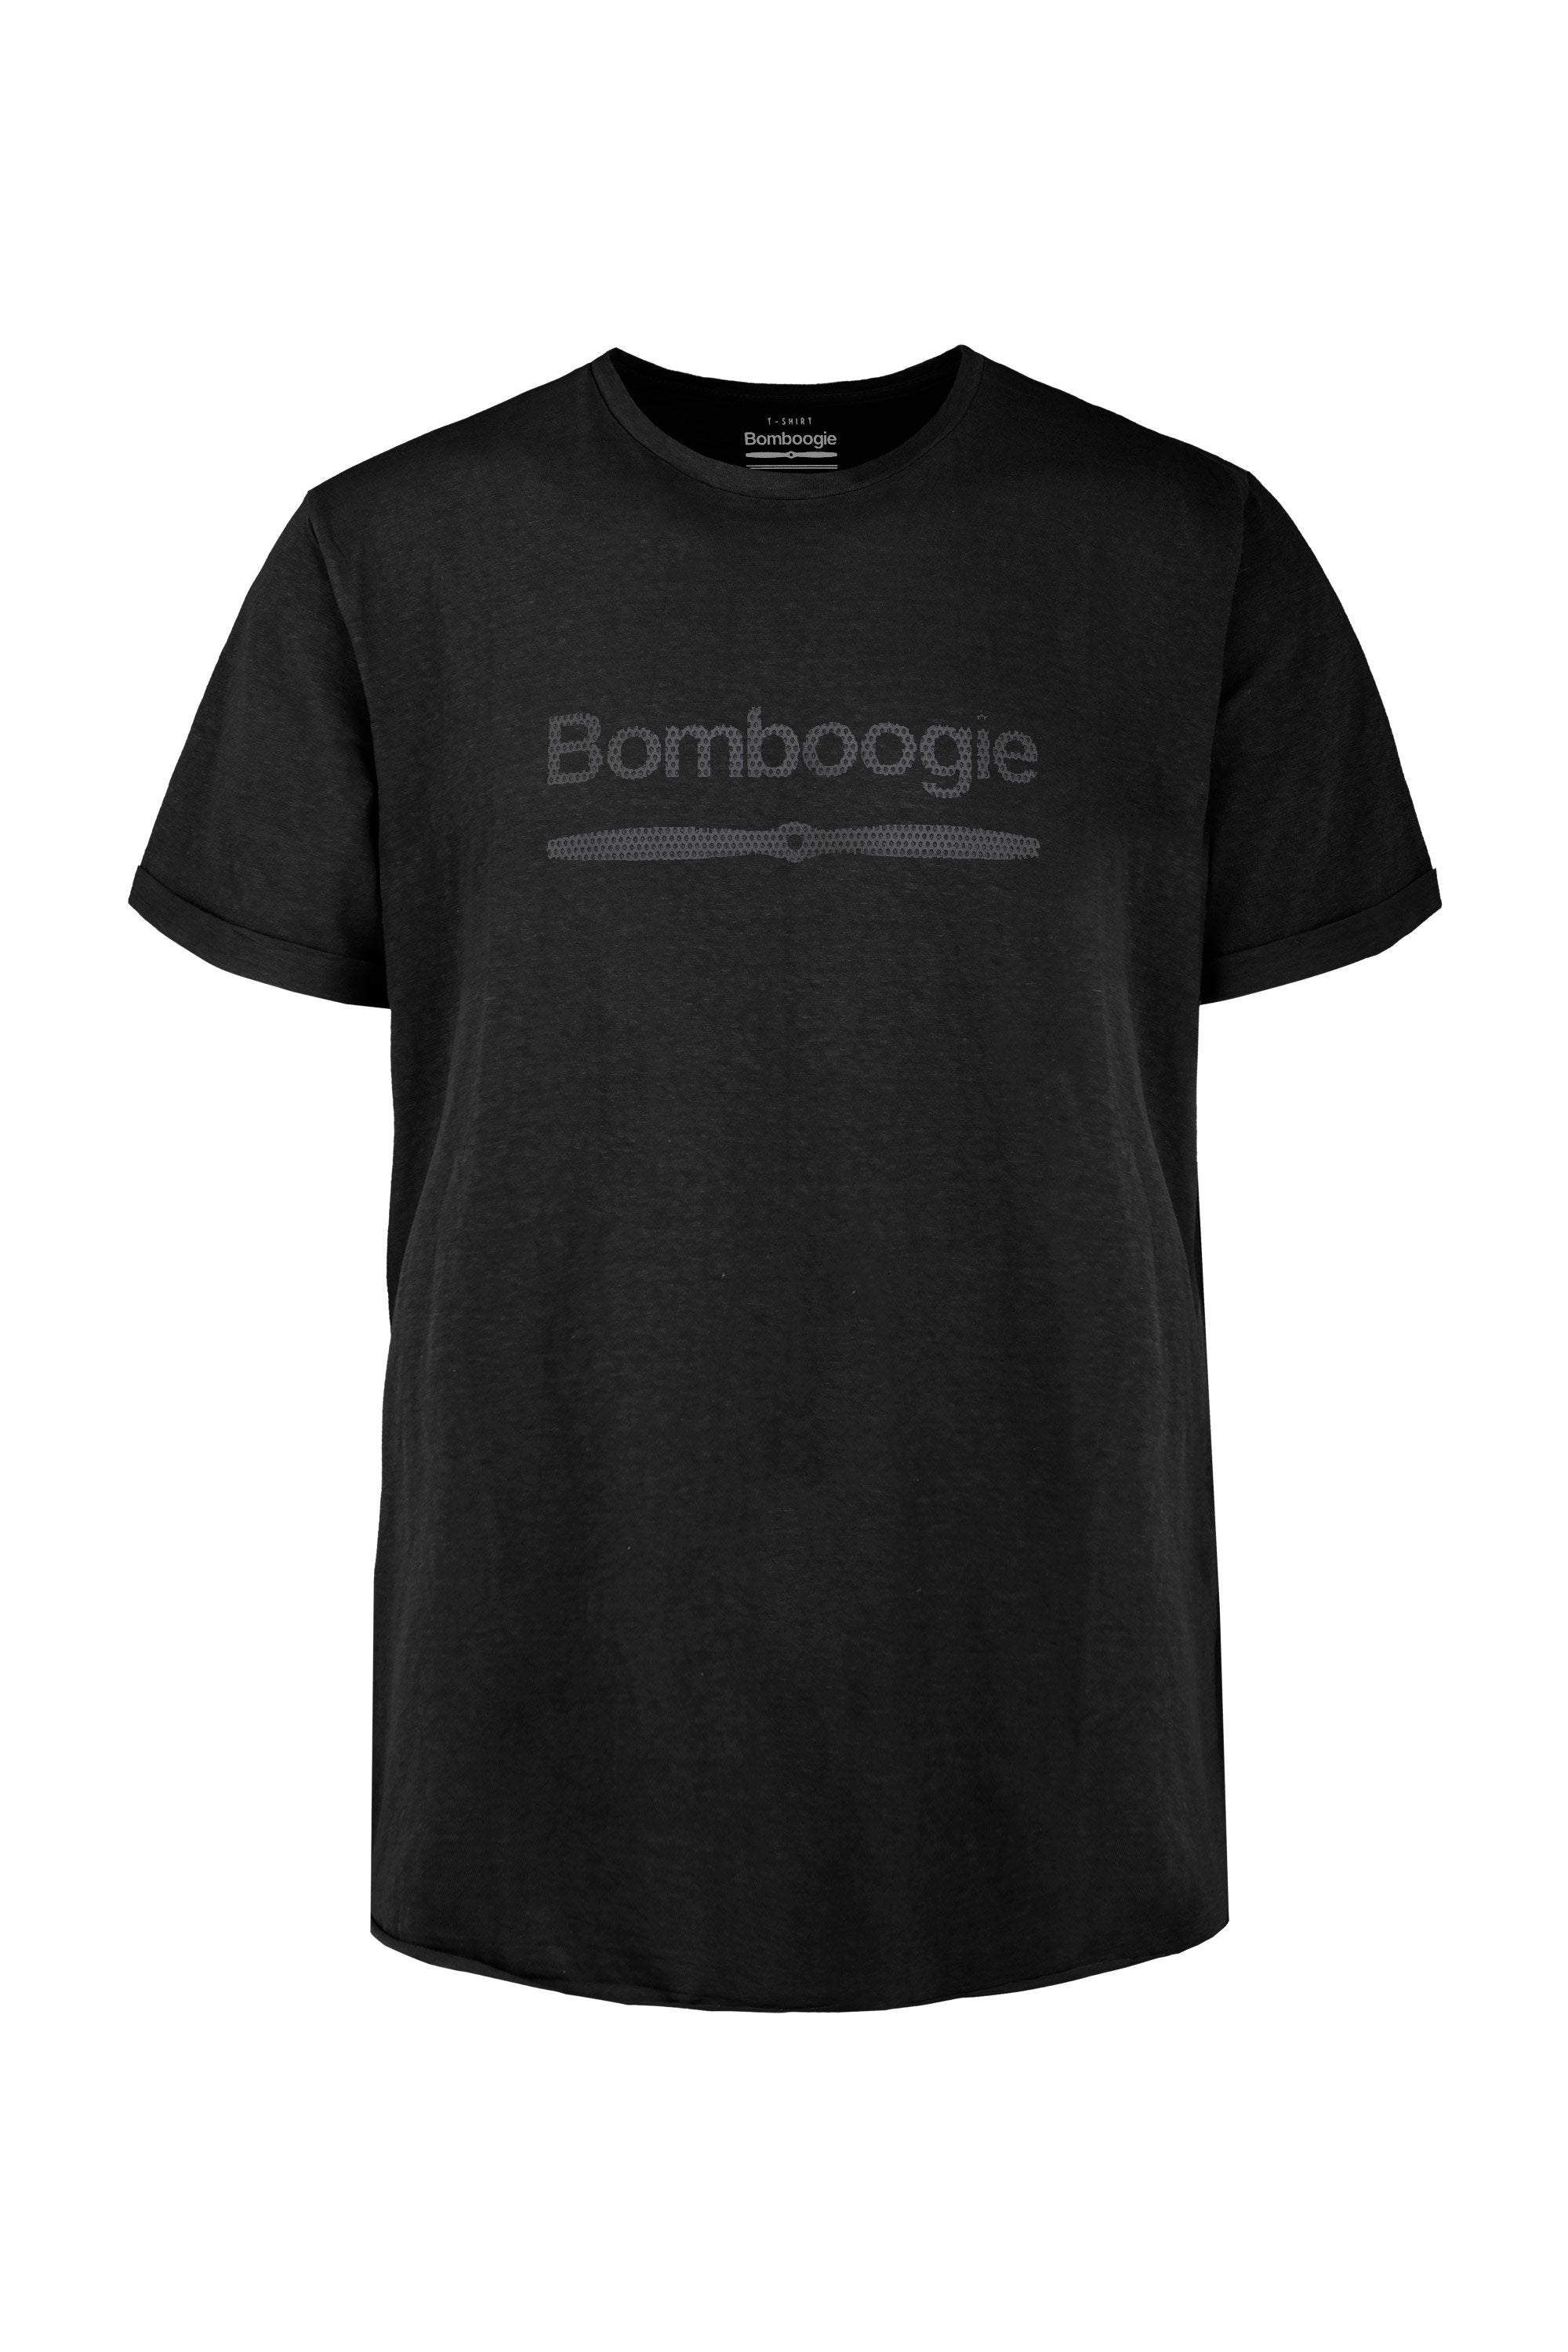 Bomboogie T-Shirt in Cotone con Stampa Bomboogie Orizzontale TM7451TJCOR 90 black